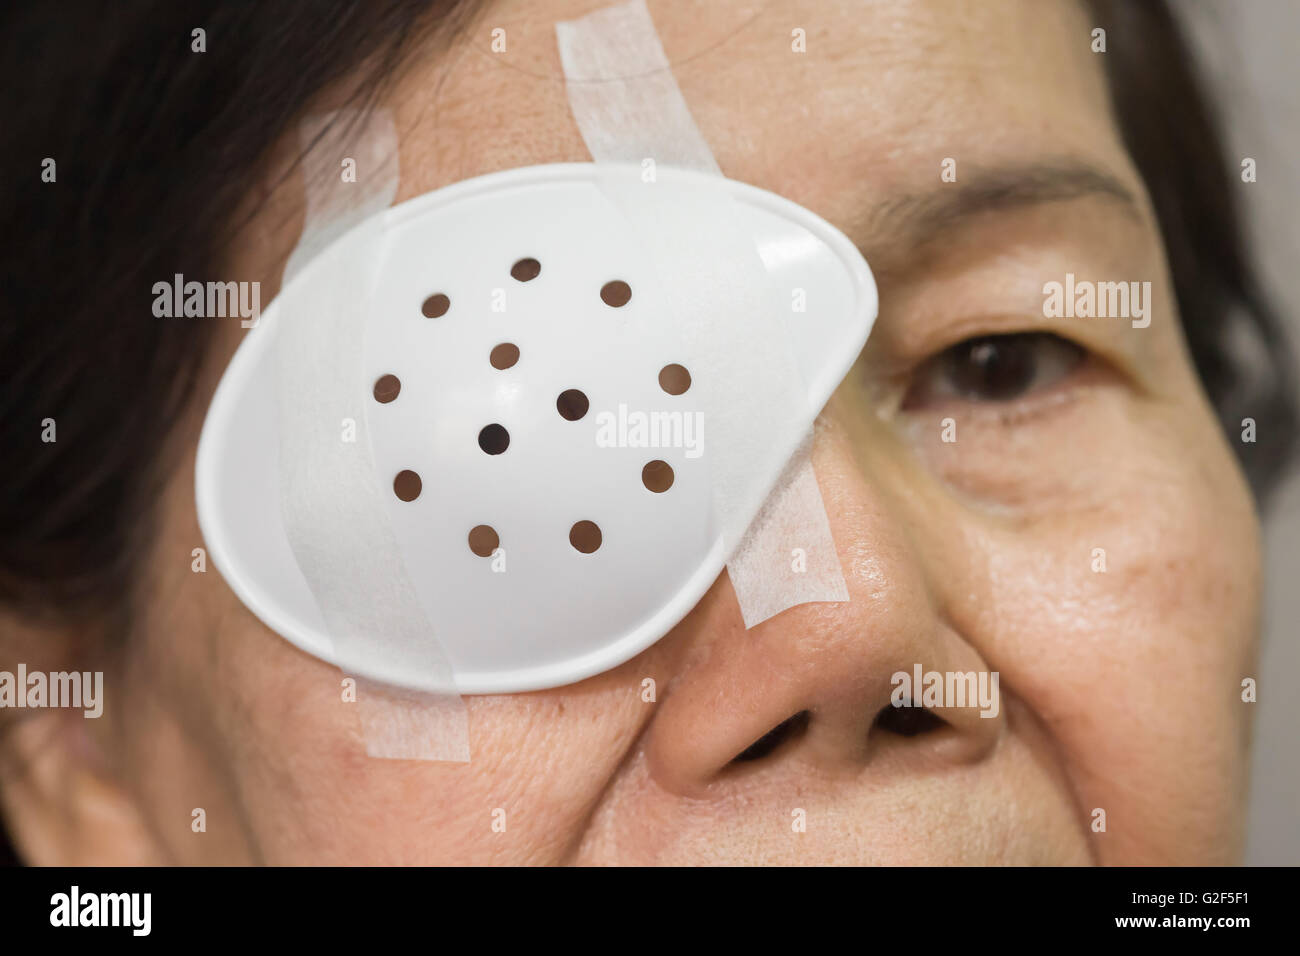 Eye shield covering after cataract surgery. Stock Photo